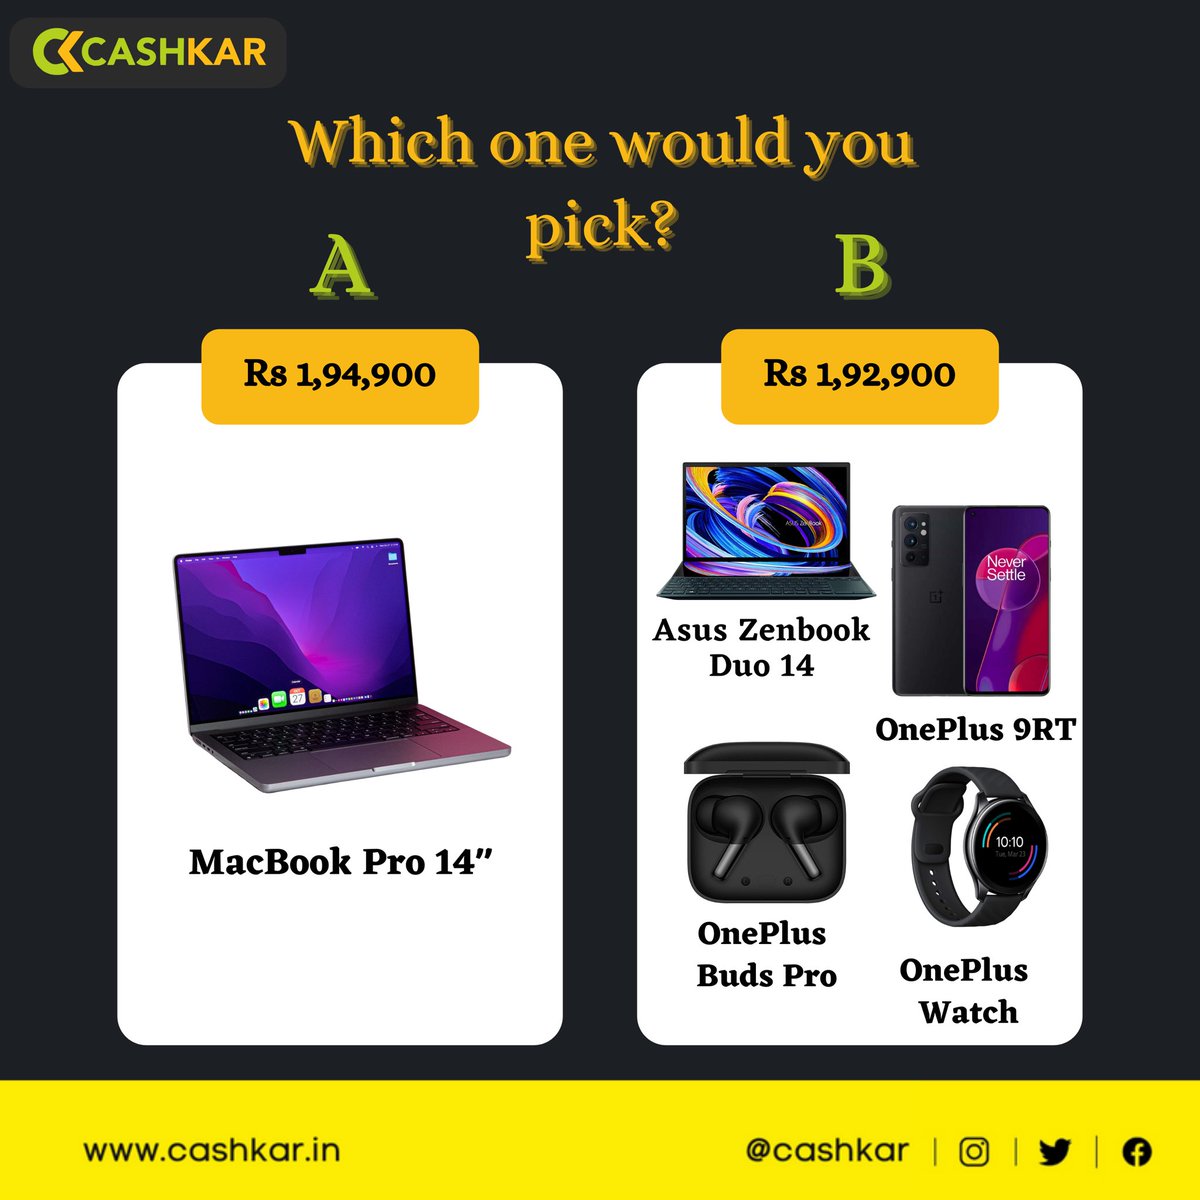 Which one will you choose?
Comment
Follow Us For More Such Content.
Tags:- 
#cashkar #technology #tech #selloldphone #sellusedphone